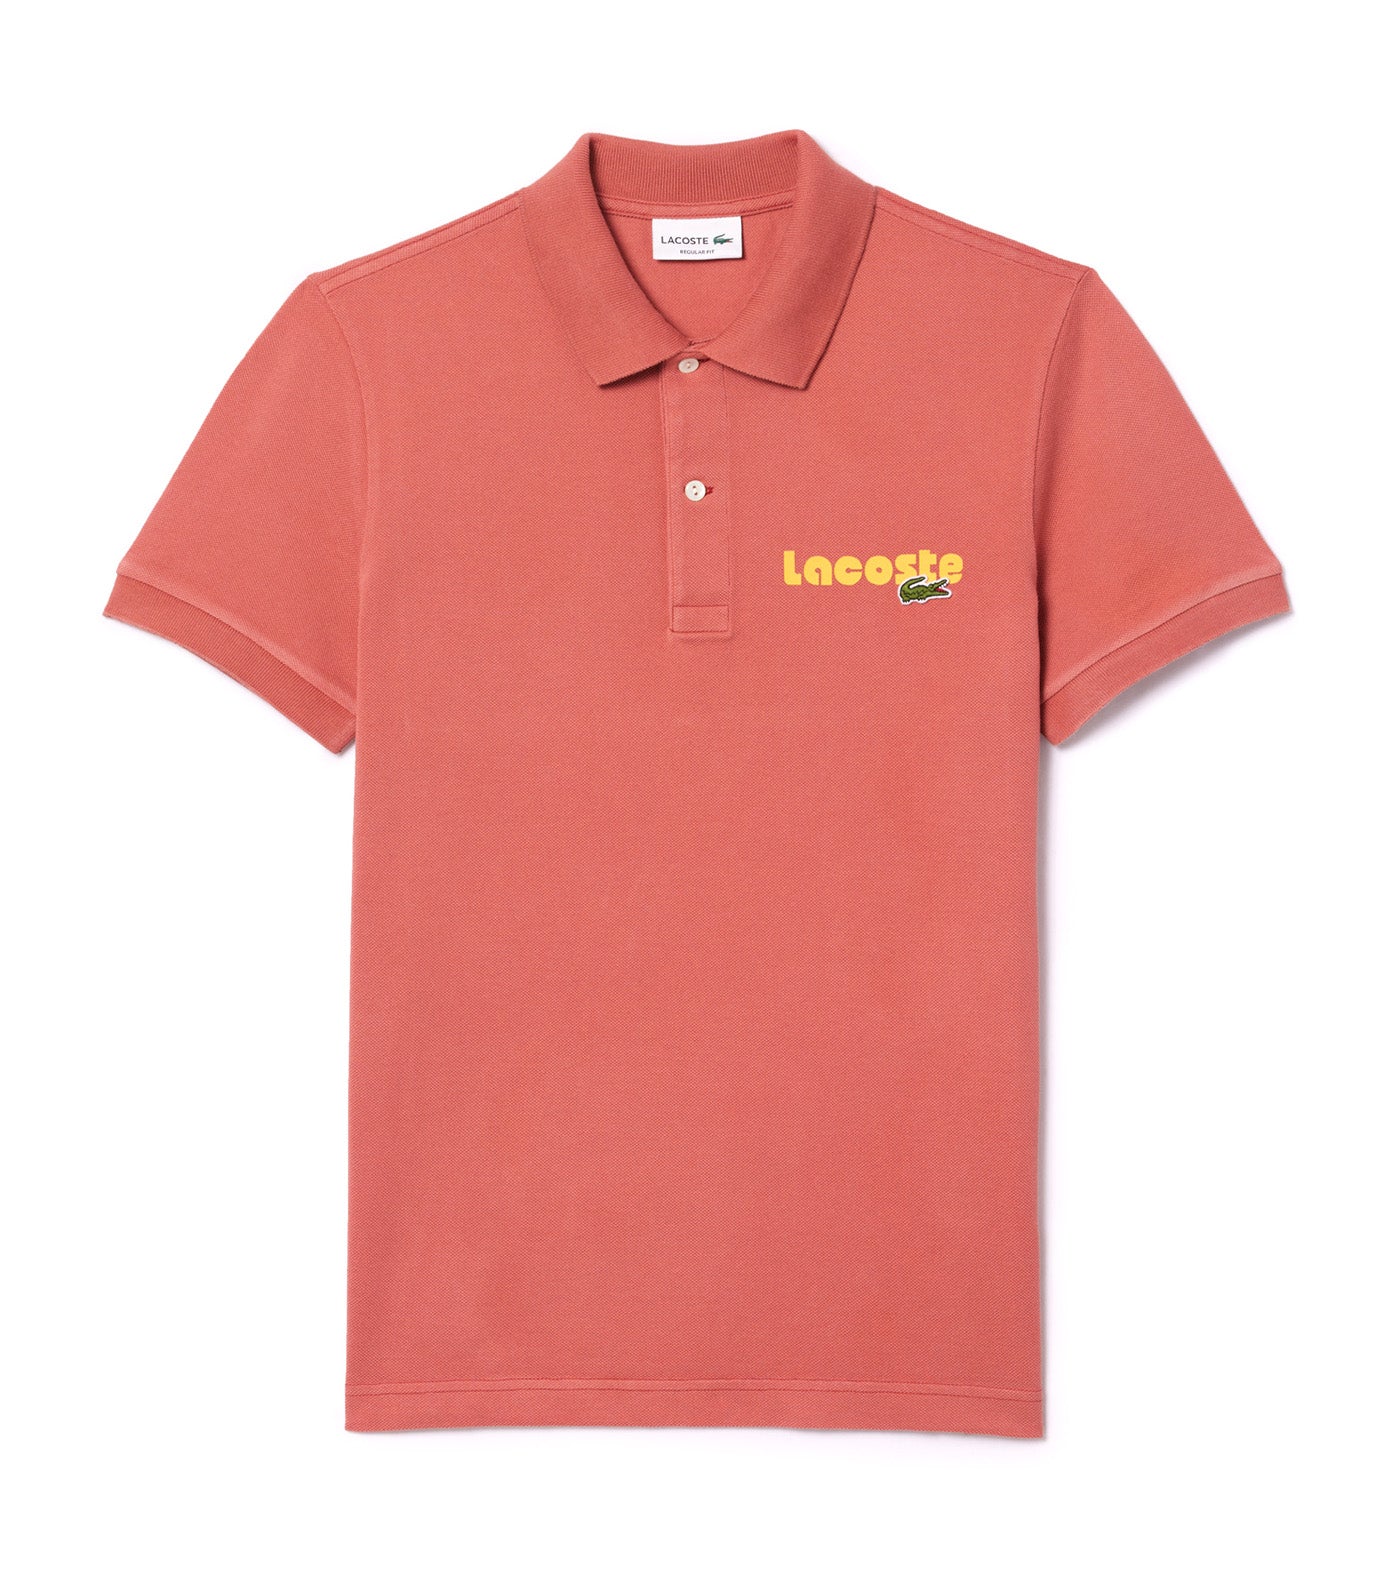 Men's Name Print Washed Polo Shirt Sierra Red